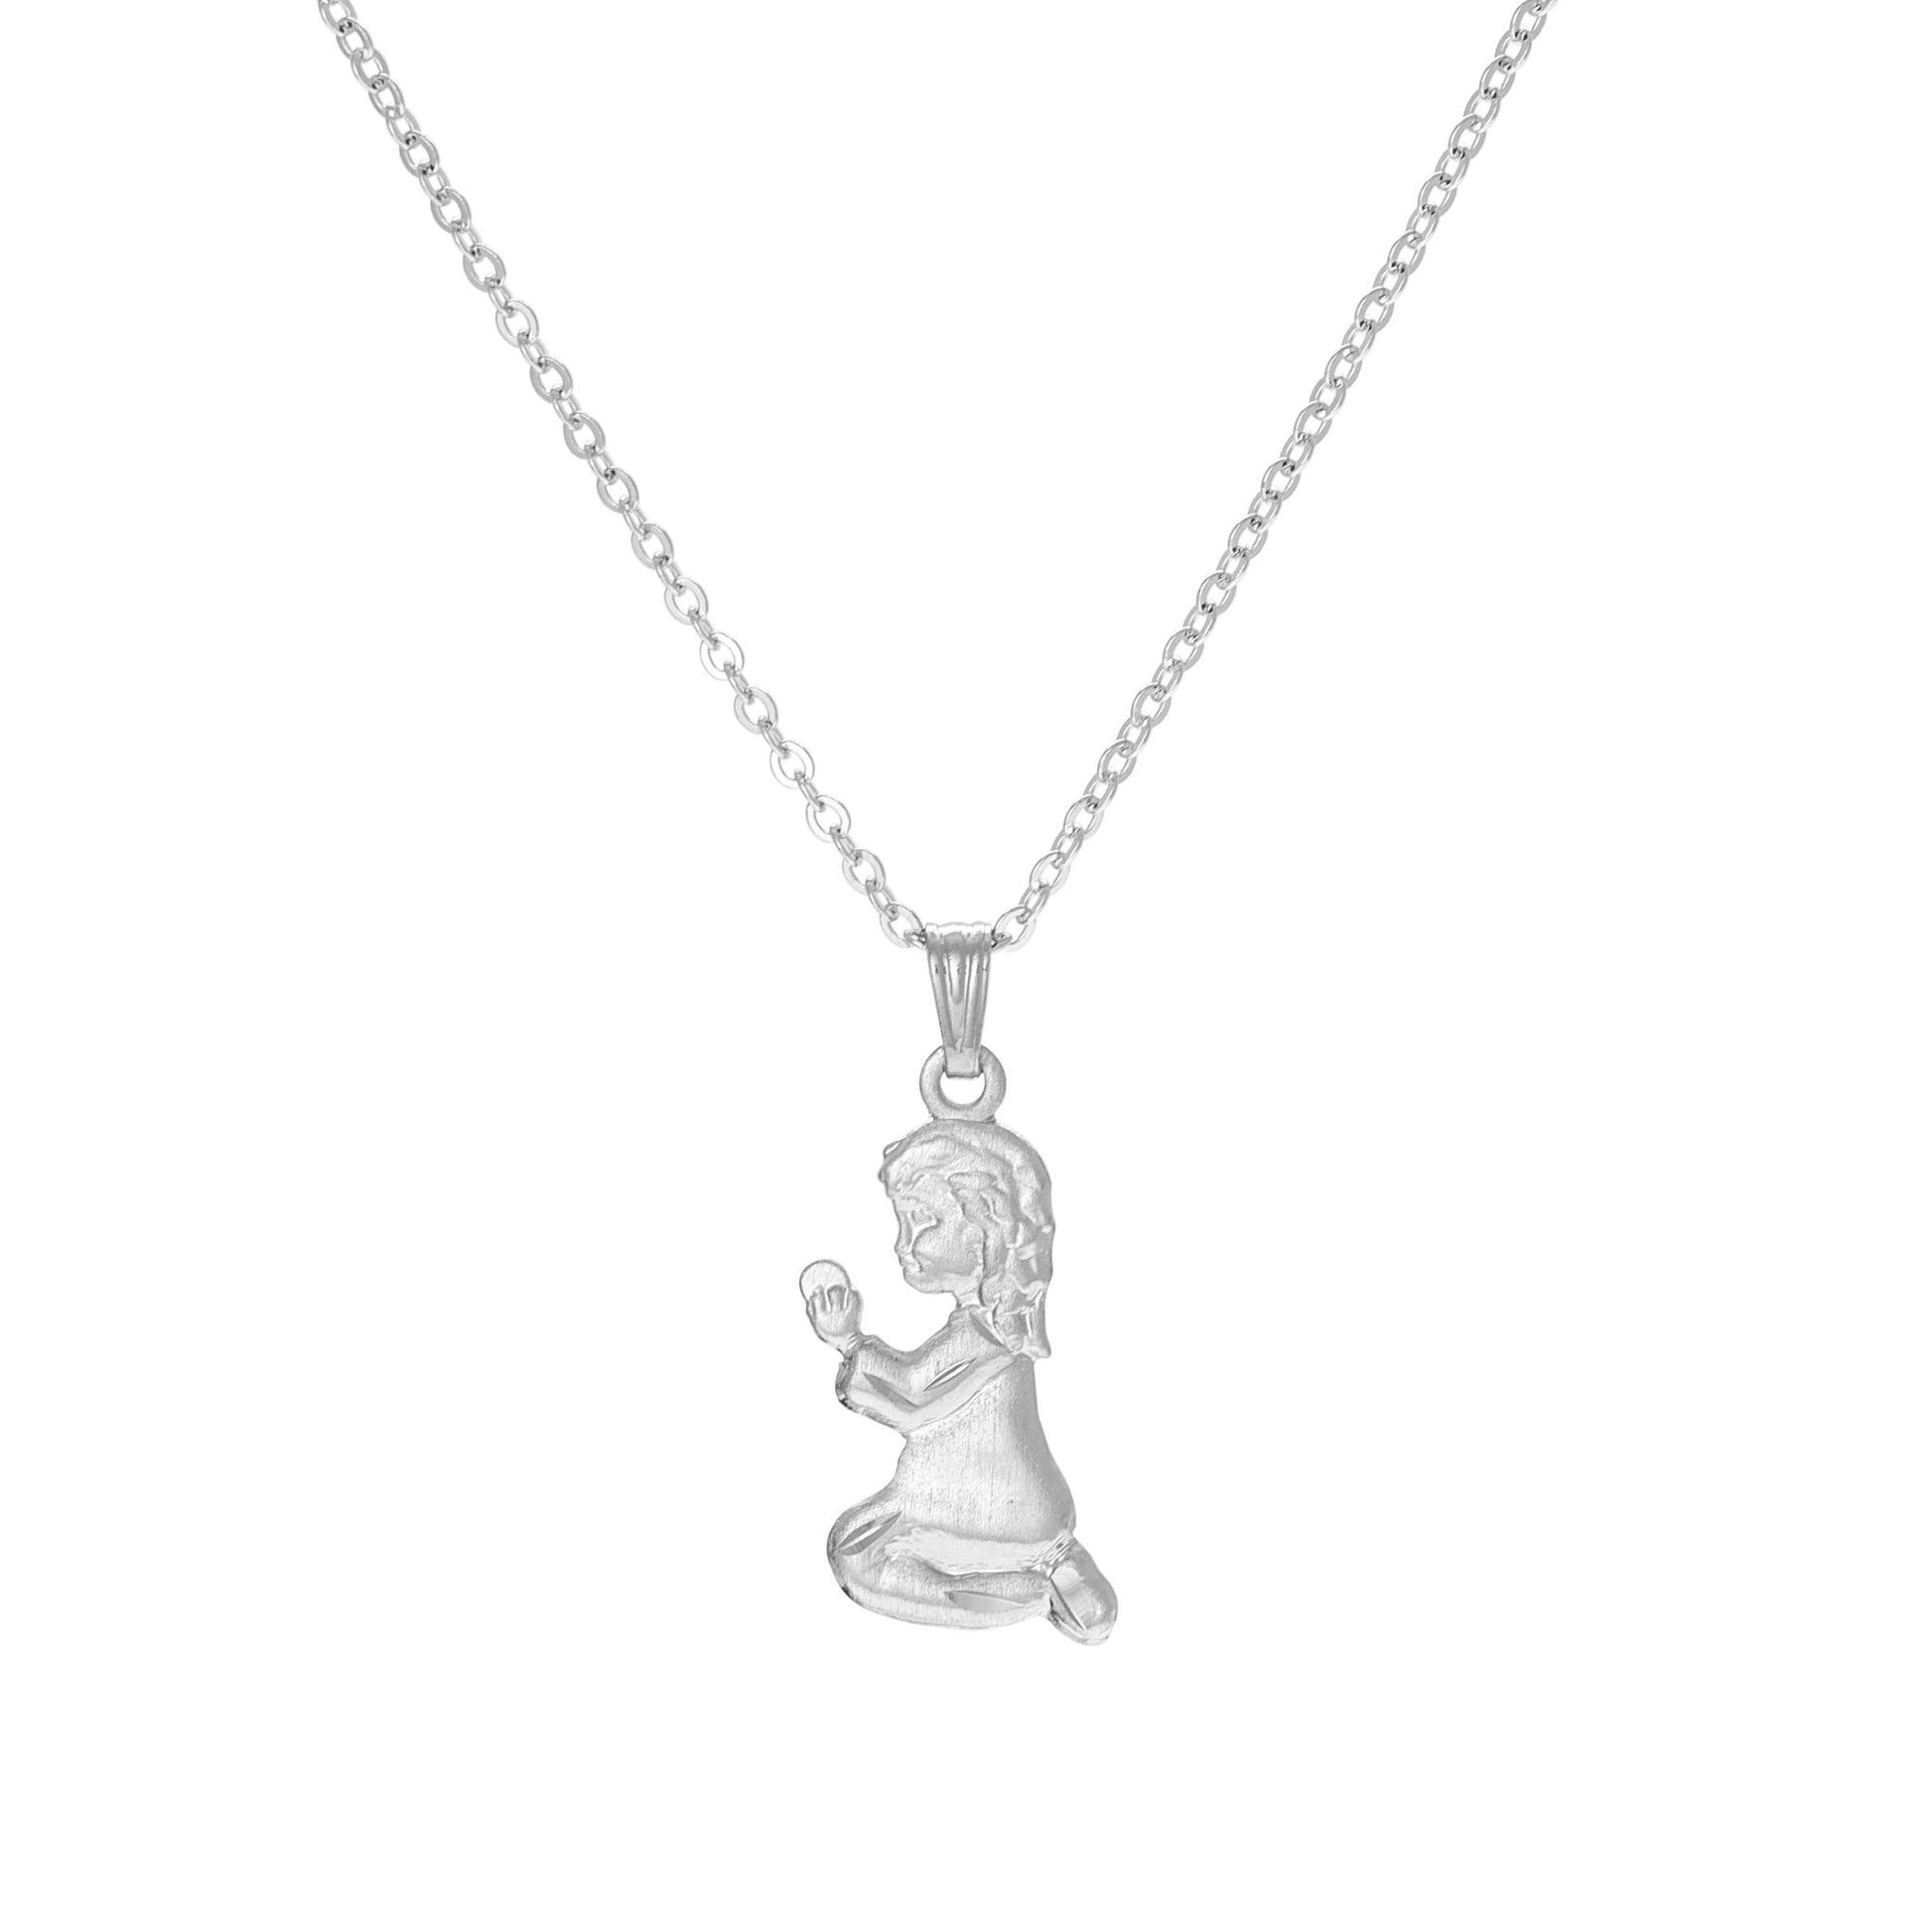 A praying child necklace displayed on a neutral white background.